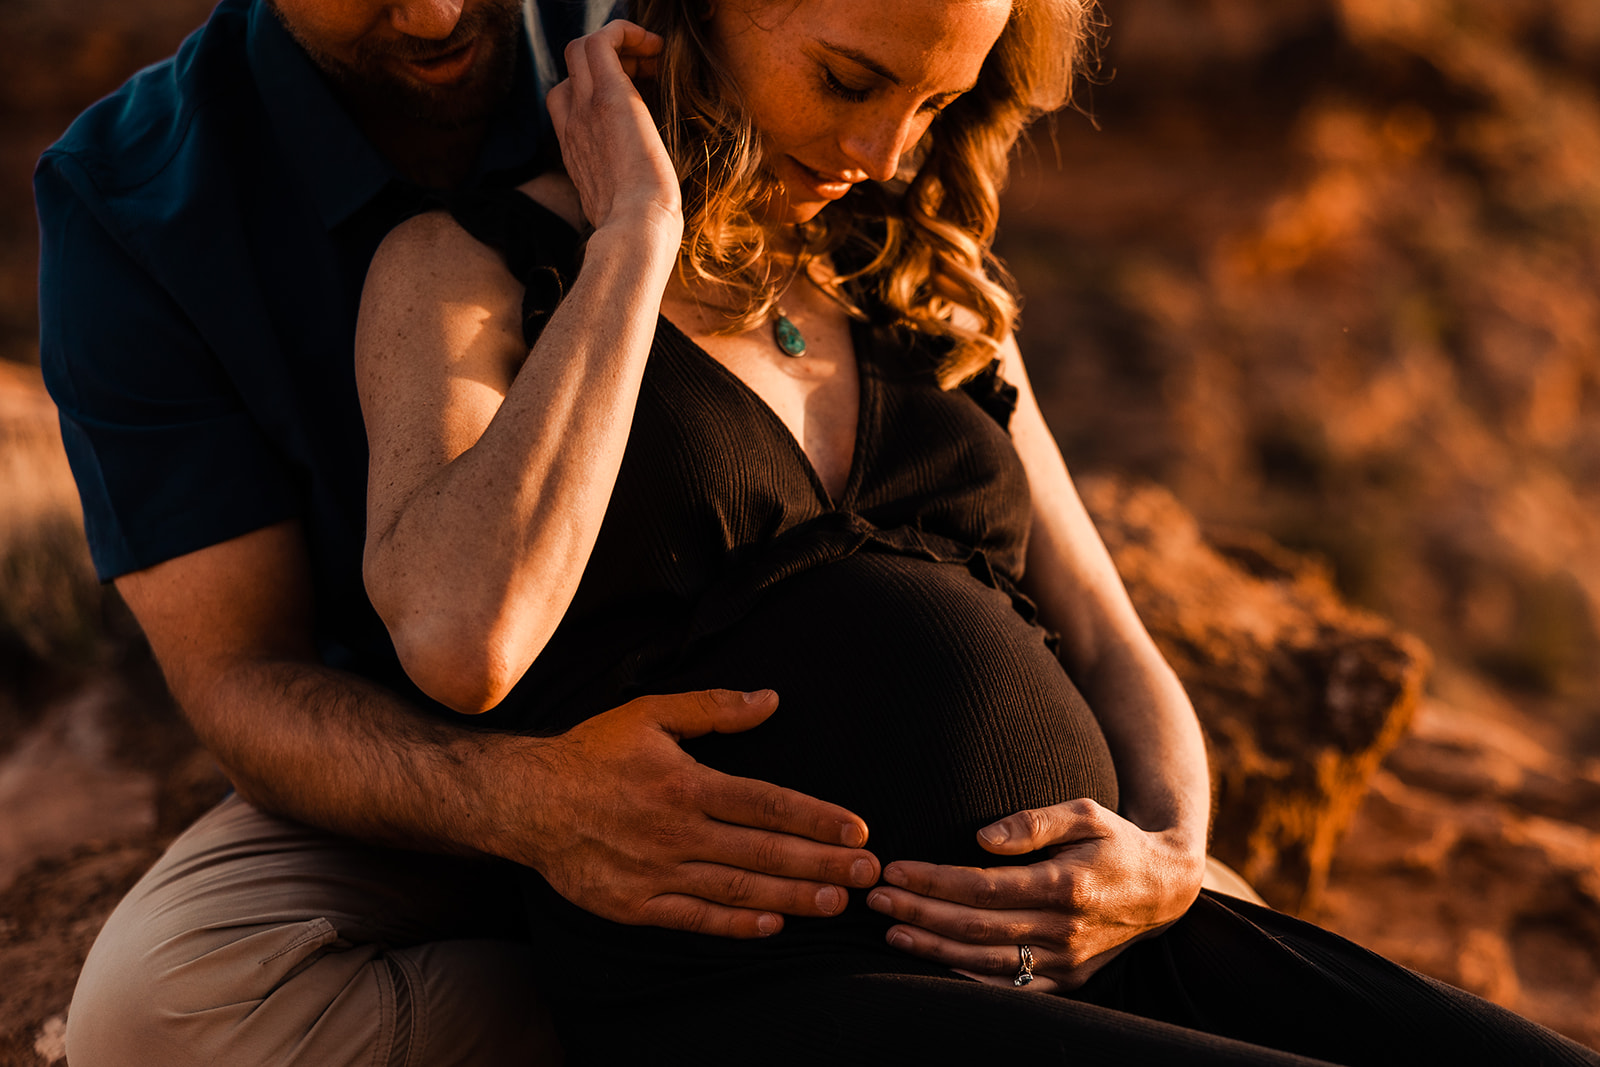 sunset maternity photos on a hike in moab